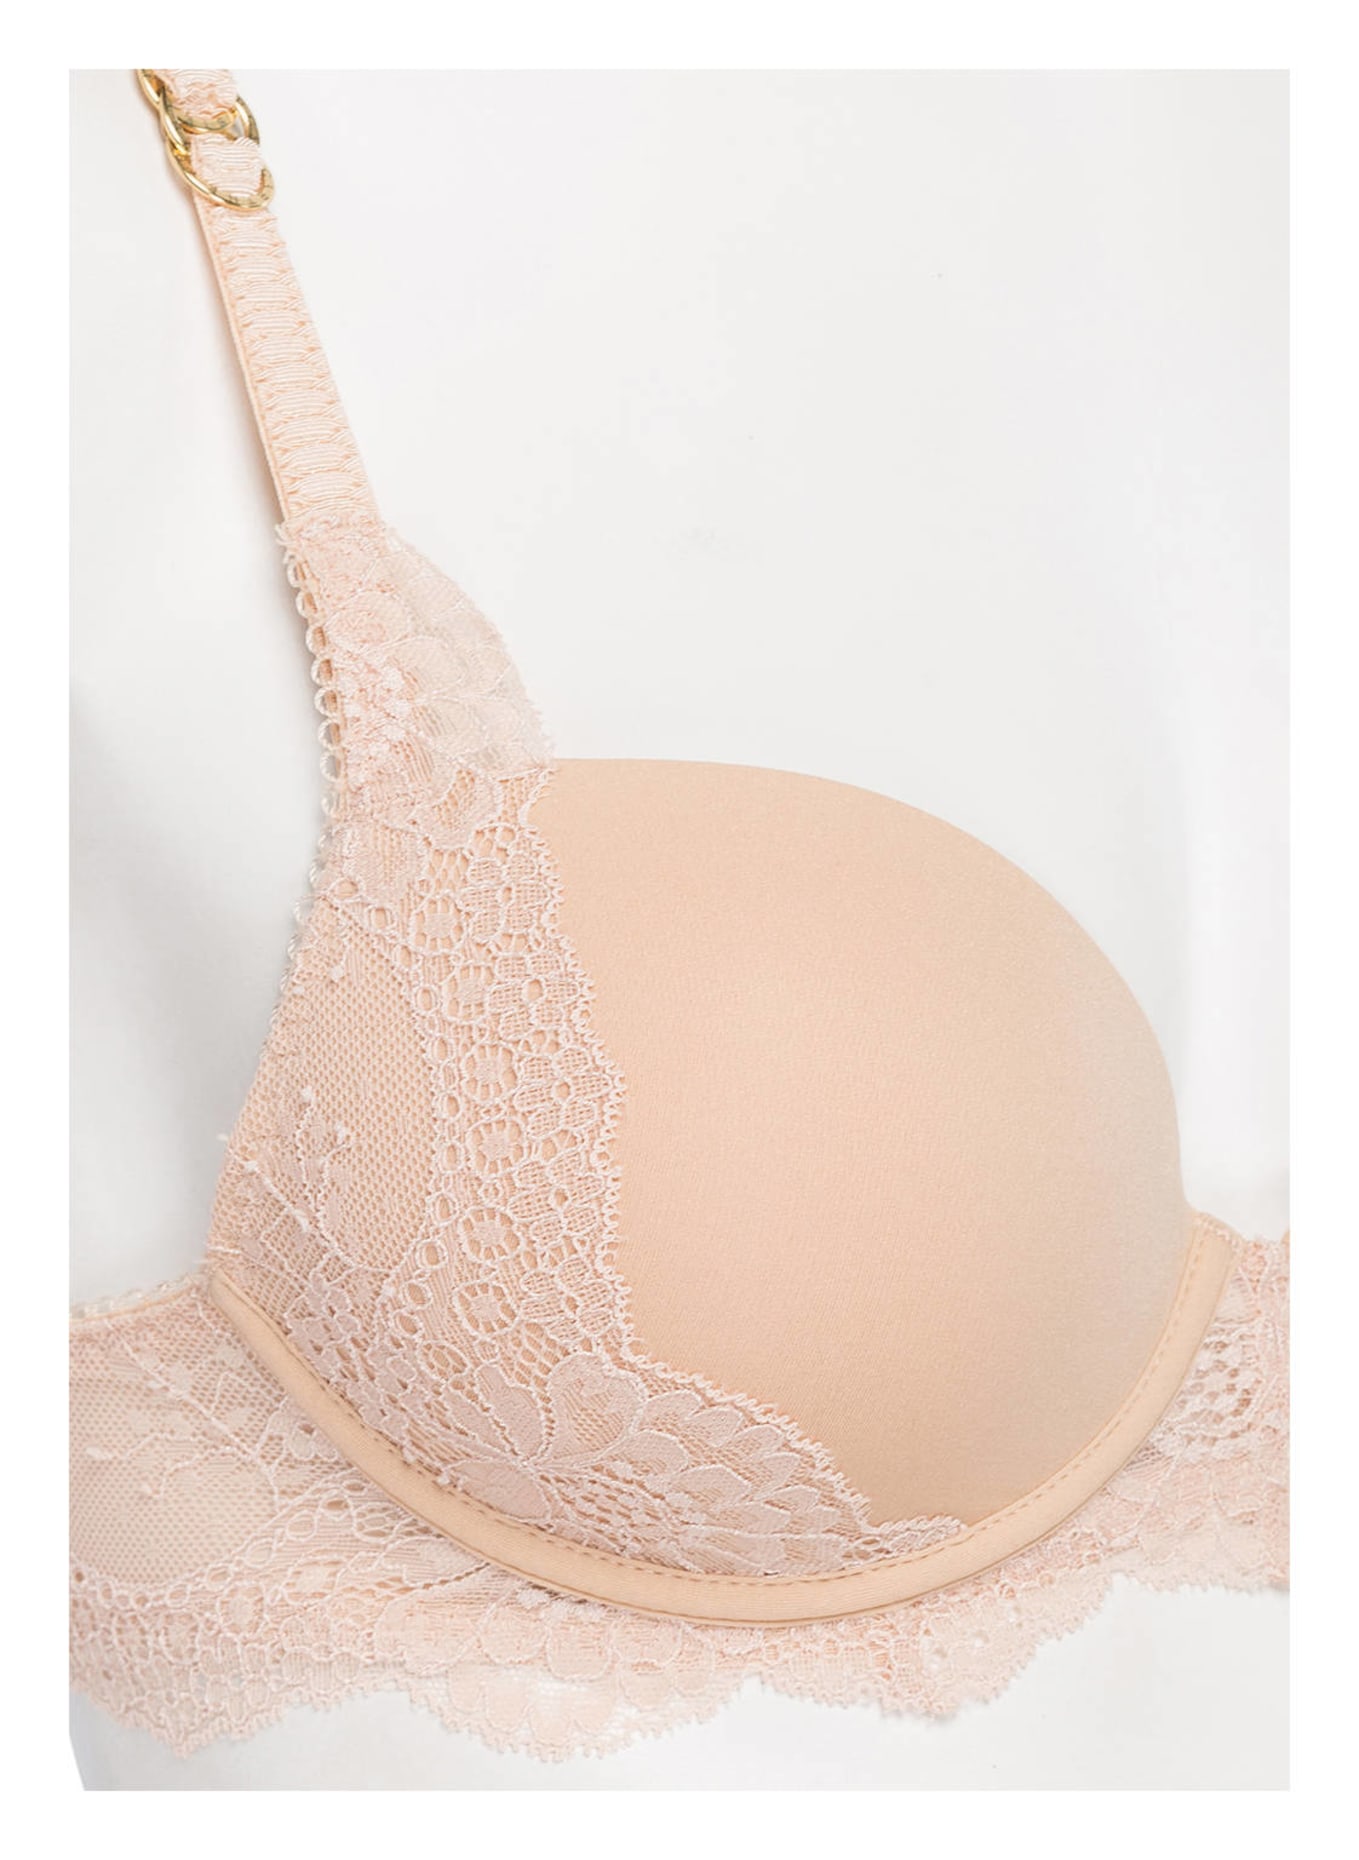 STELLA McCARTNEY LINGERIE  Push-up bra SMOOTH & LACE, Color: NUDE (Image 4)